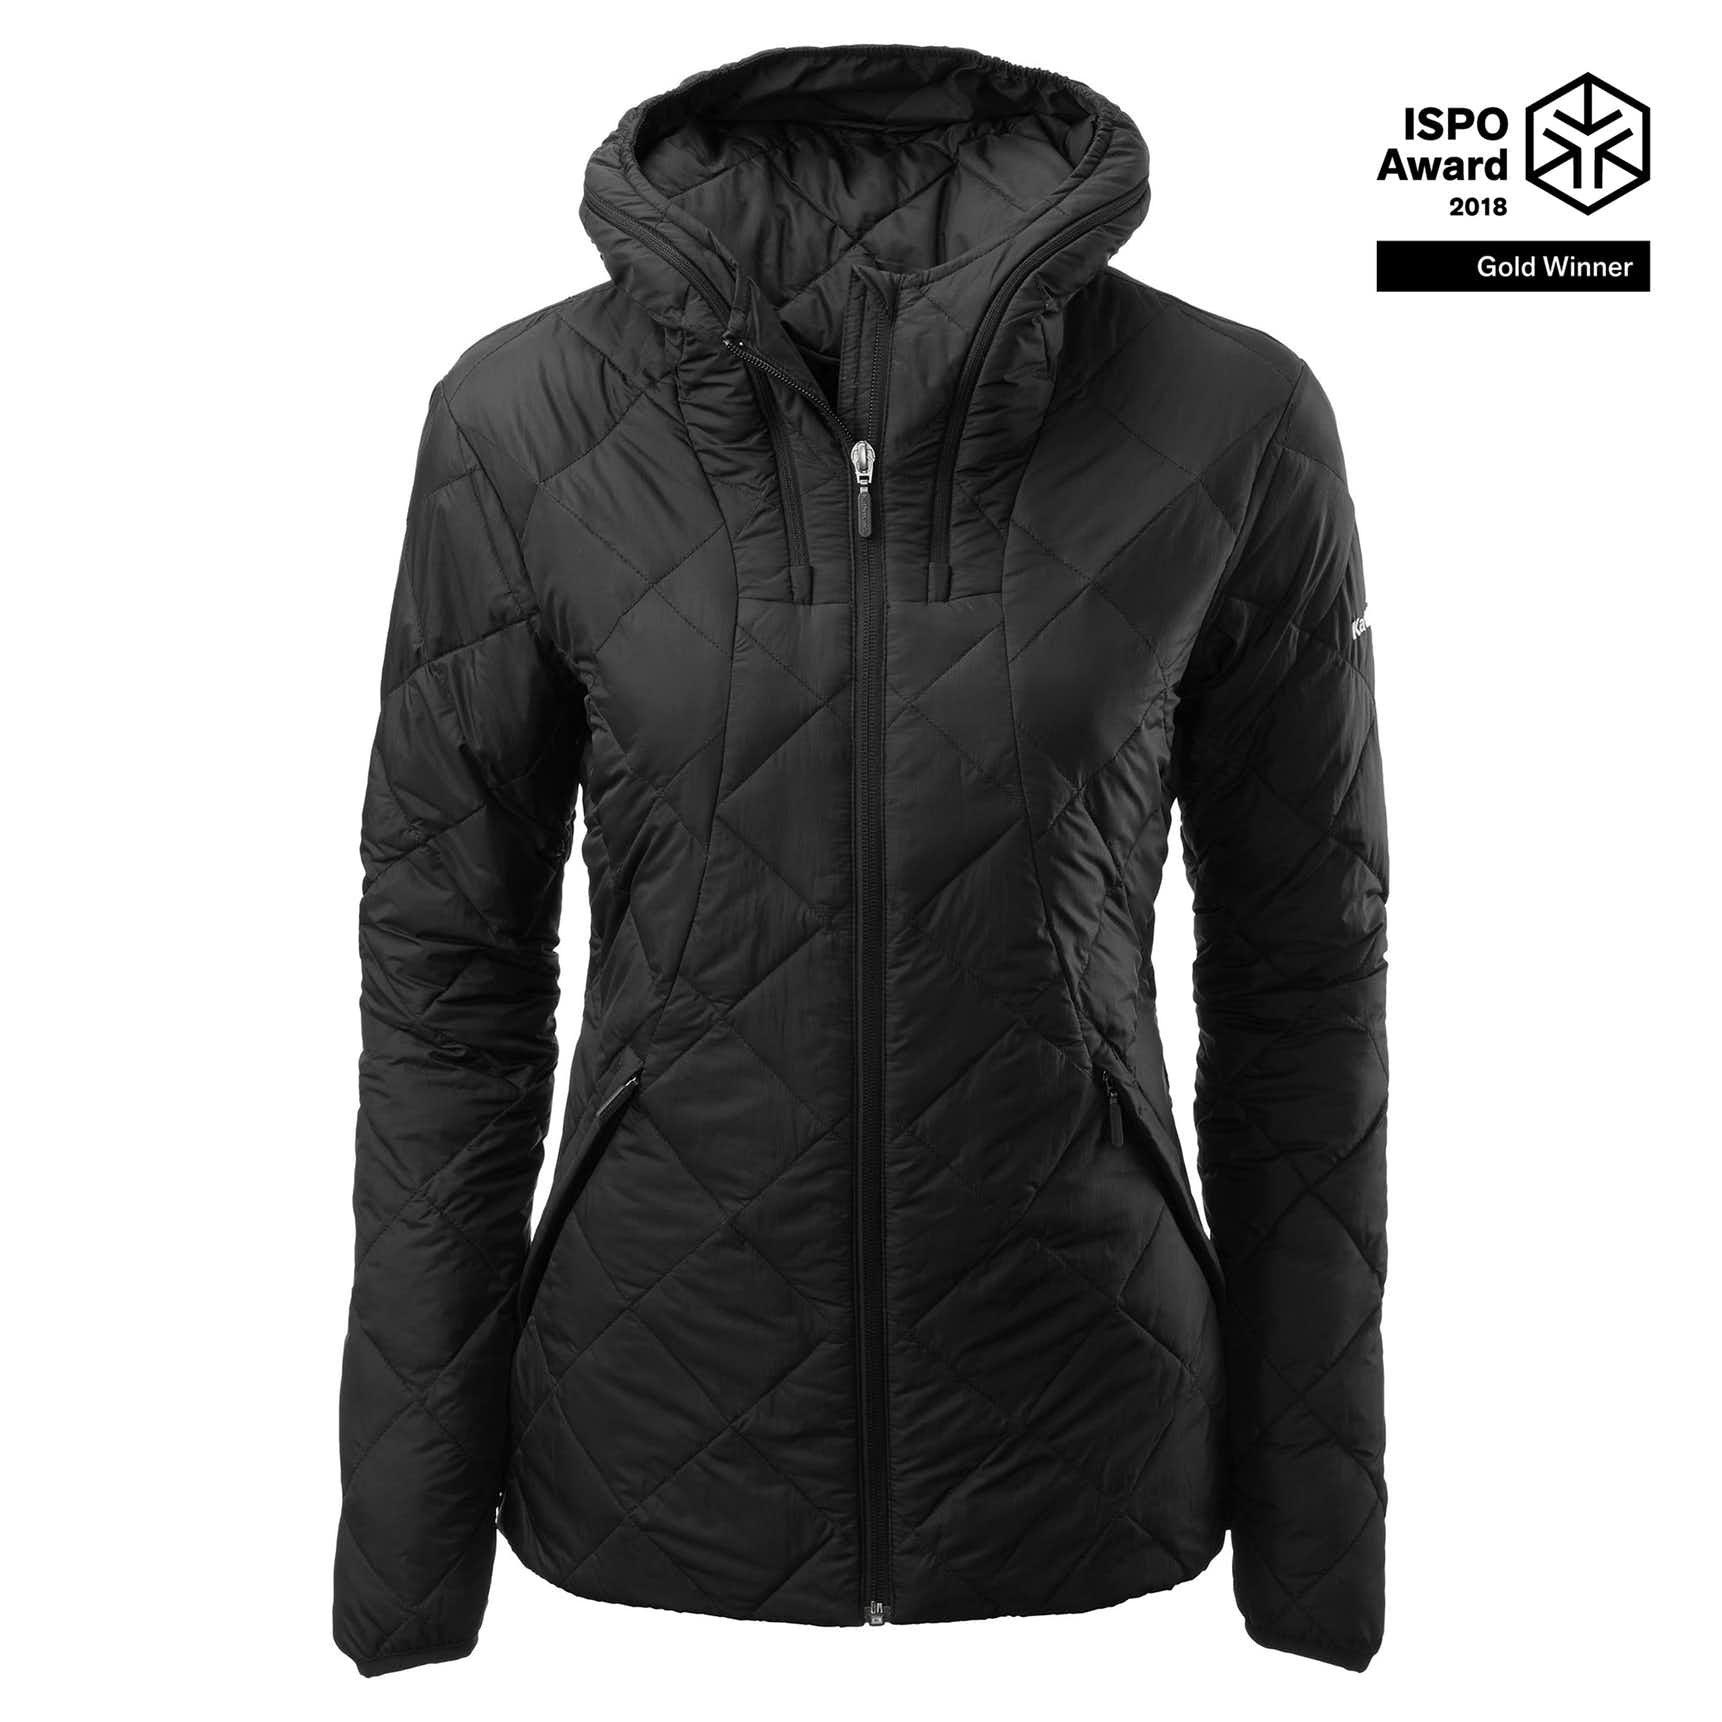 Lawrence Women's Insulated Jacket